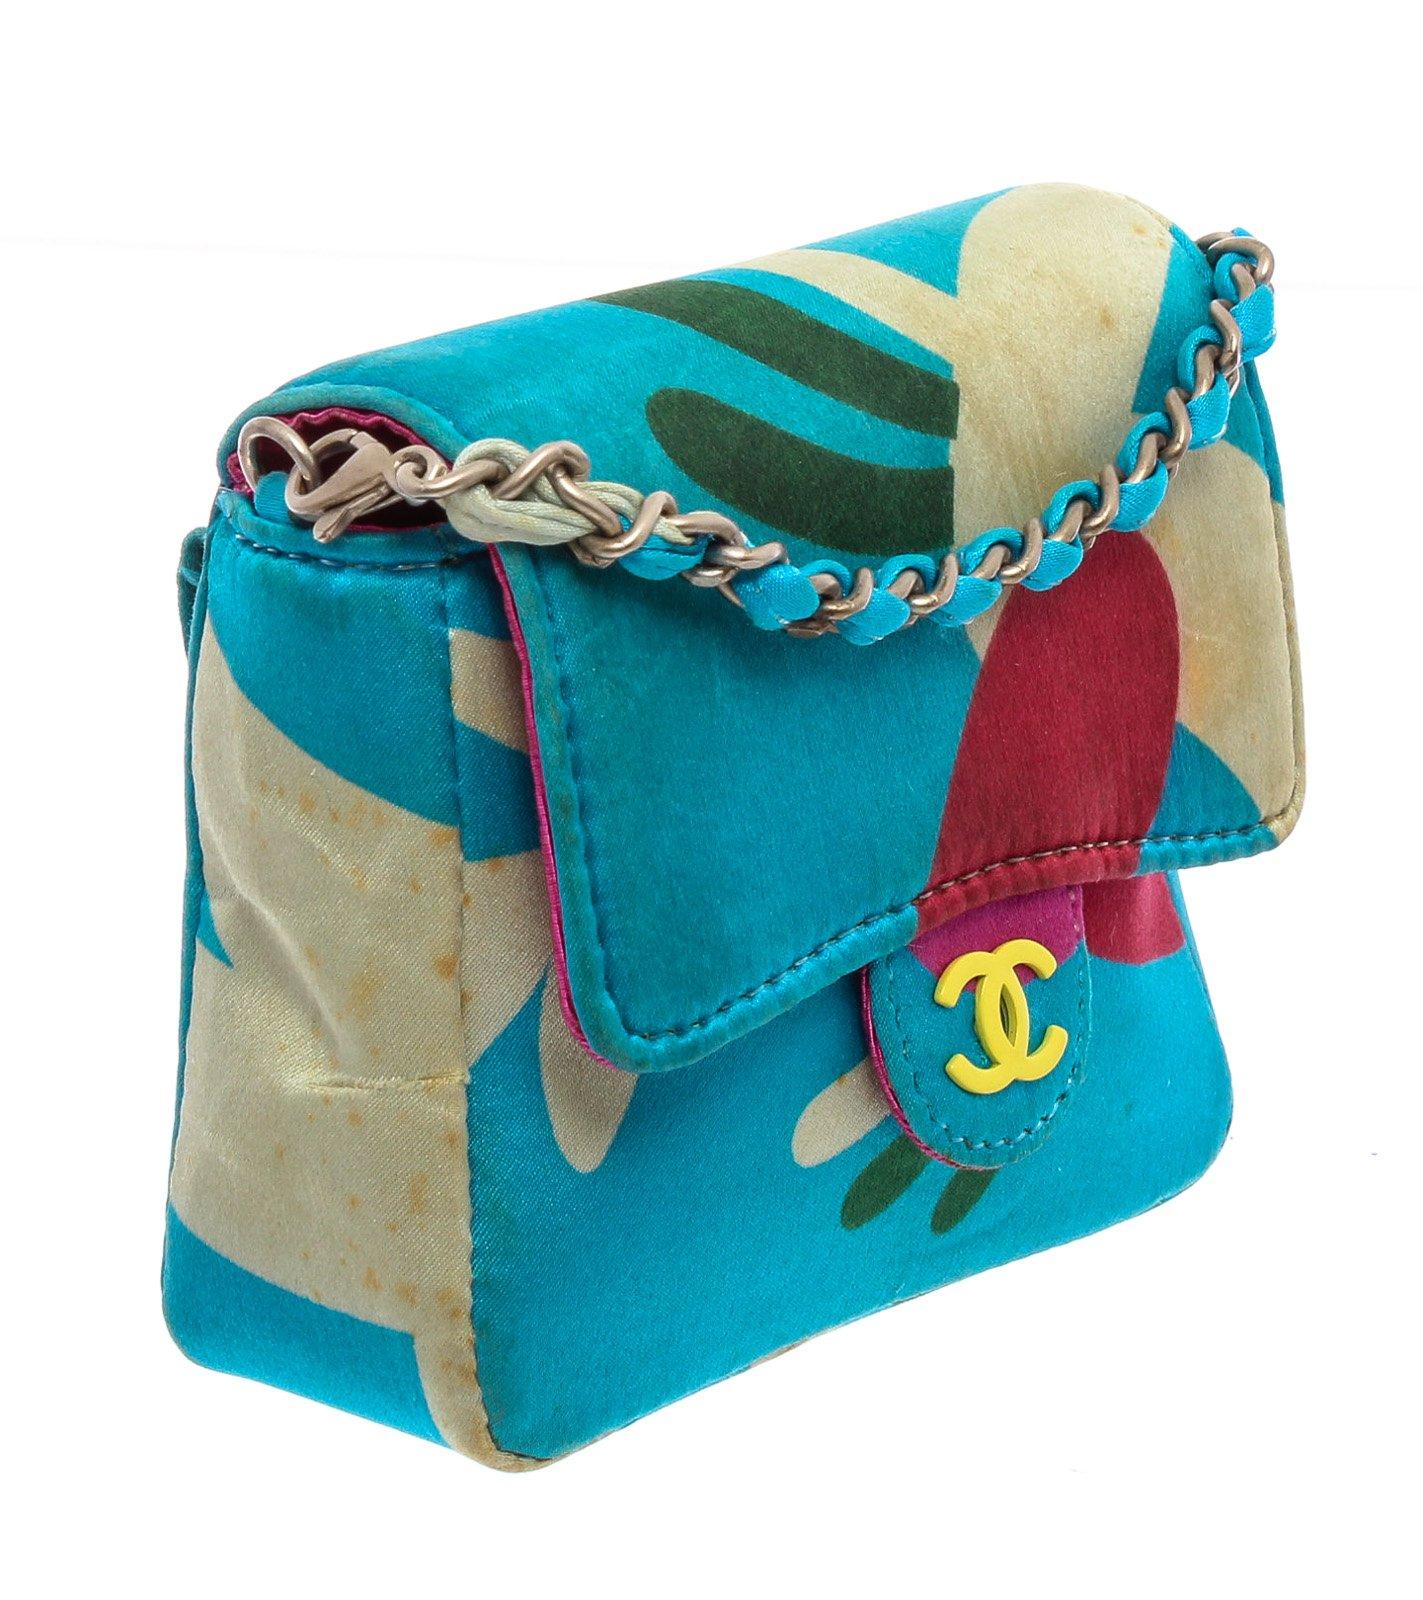 Chanel Blue Multicolor Satin Mini Messenger Pouch features a satin multicolor print with a skinny belt loop on the back and has a detachable chain strap that can be worn over your shoulder. Please note: Some staining throughout, please see